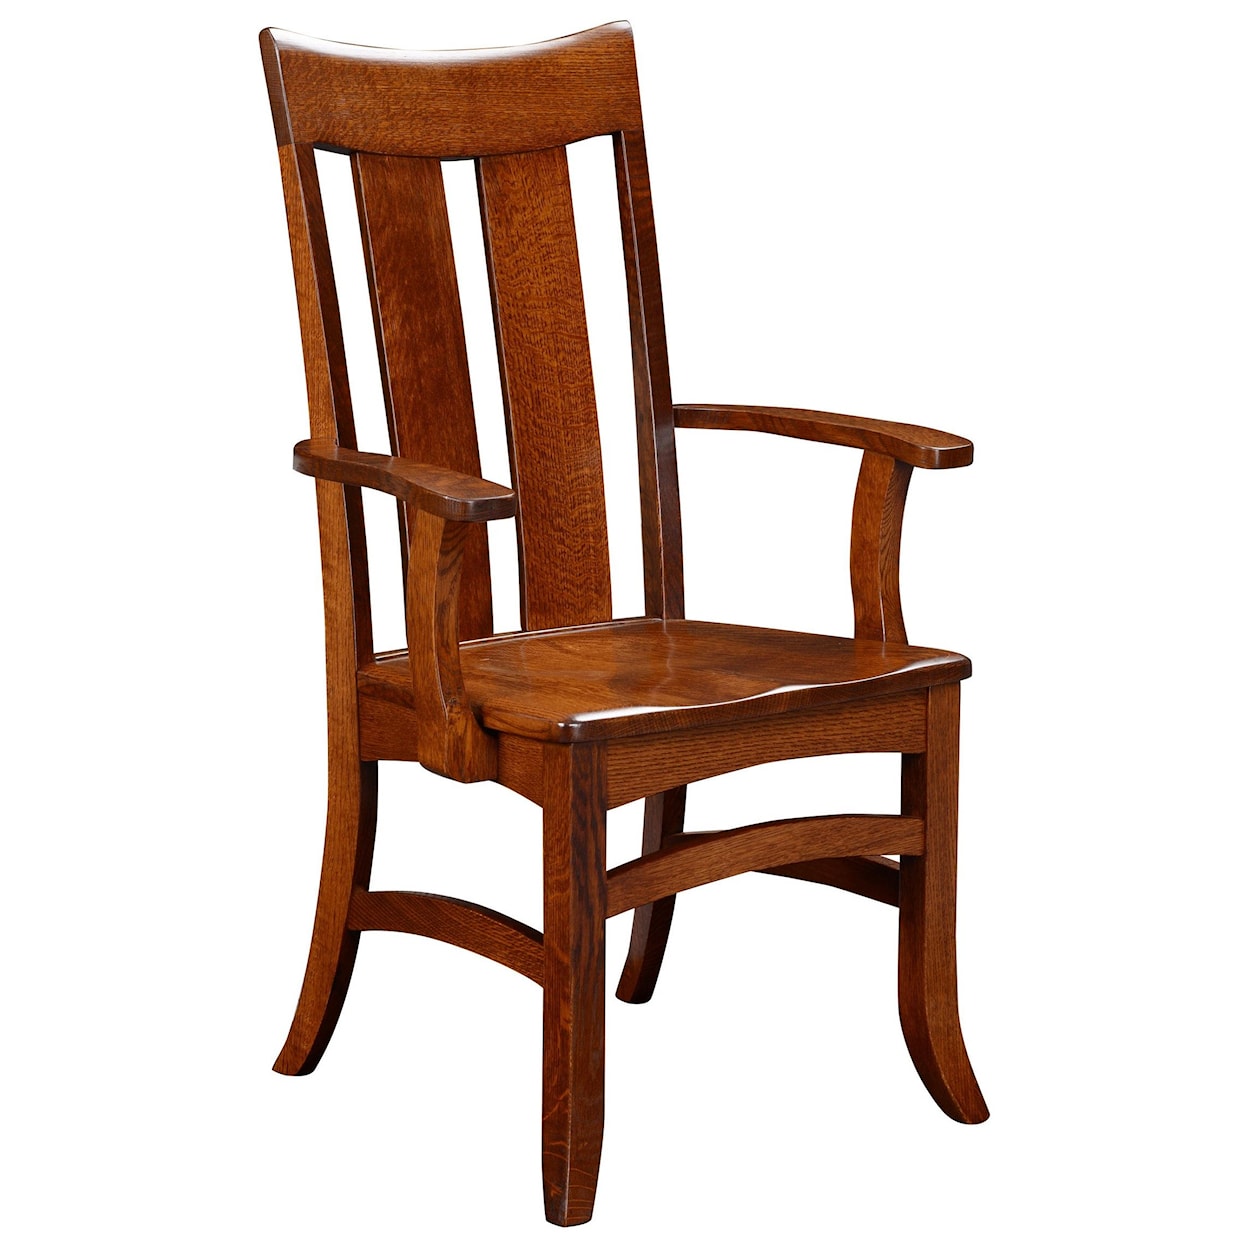 Wengerd Wood Products Galion Arm Chair